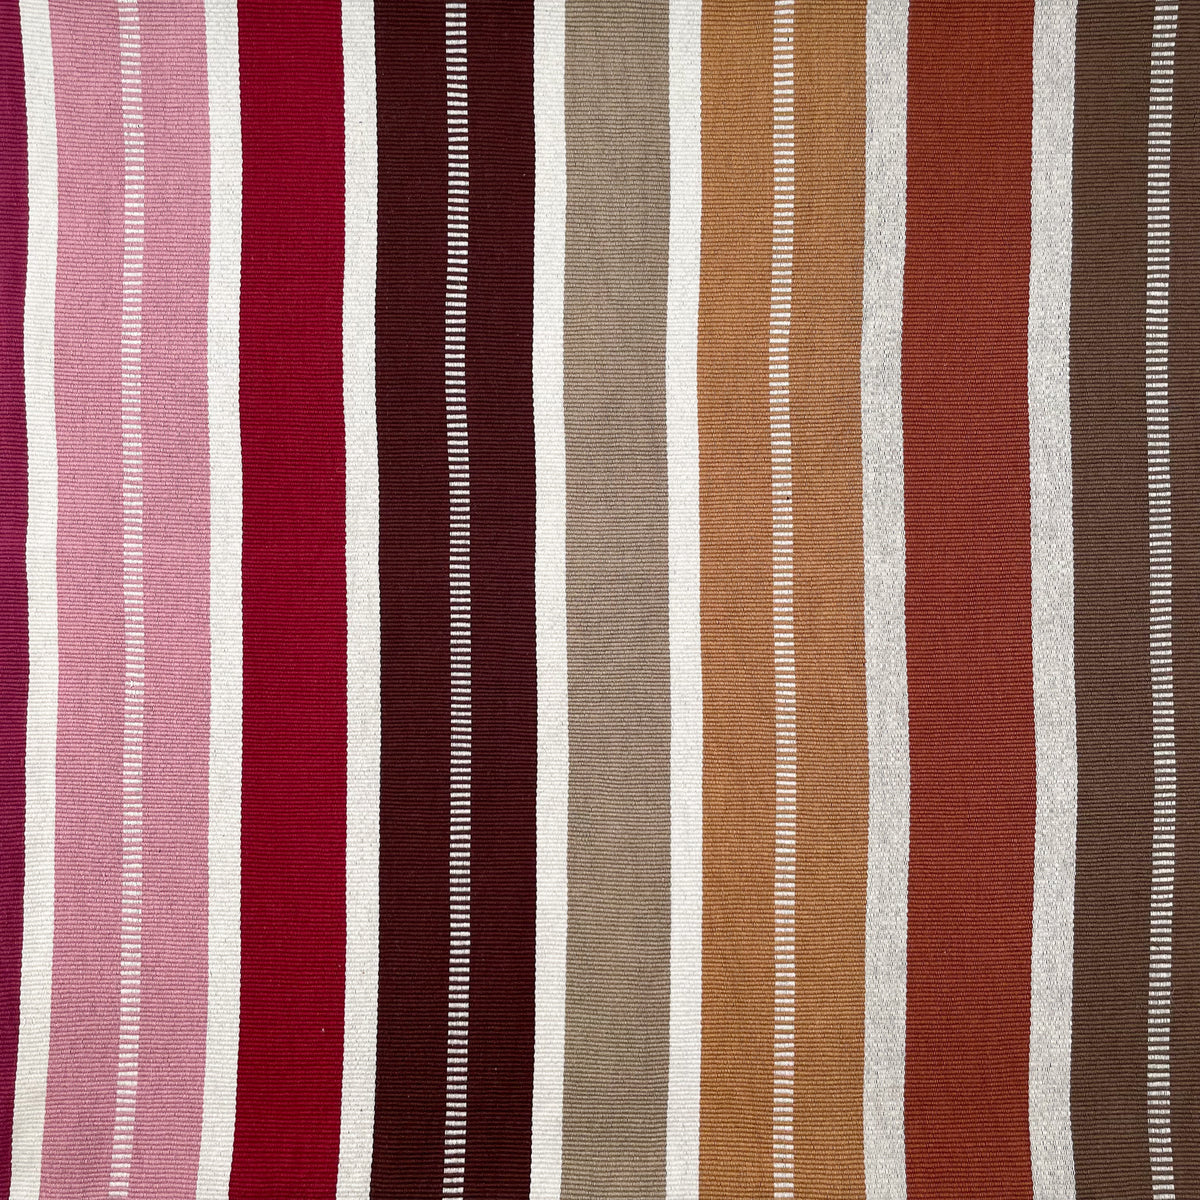 Closeup swatch of cushion cover with colorful stripes grading from pink and red to shades of brown, accented by peine stripe detail